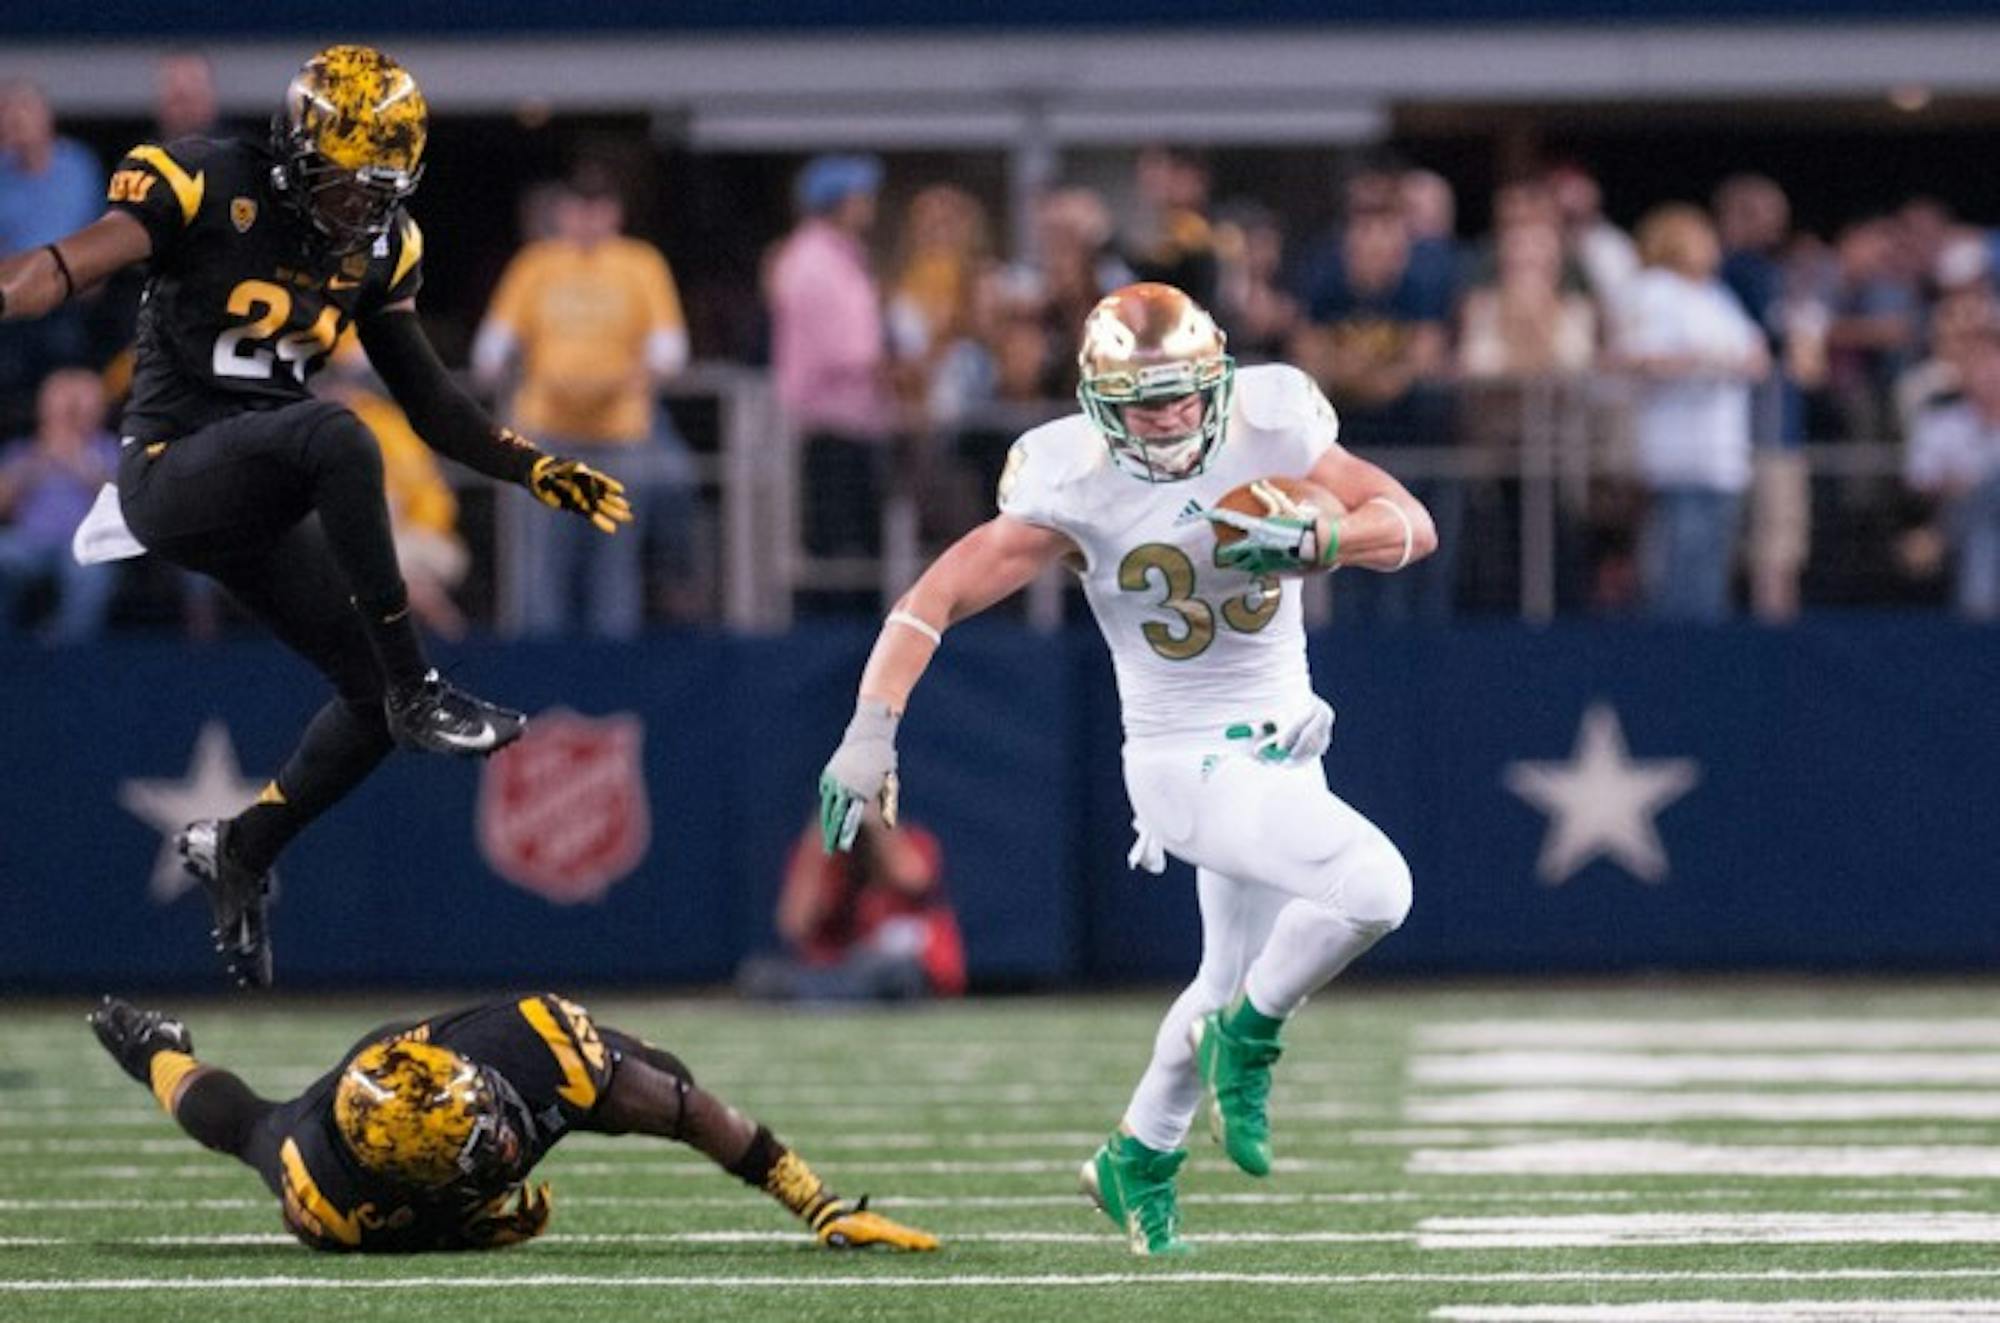 Irish senior running back Cam McDaniel evades two Arizona State defenders during Notre Dame's 37-34 win over the Sun Devils on Oct. 5 at AT&T Stadium in last year's Shamrock Series.